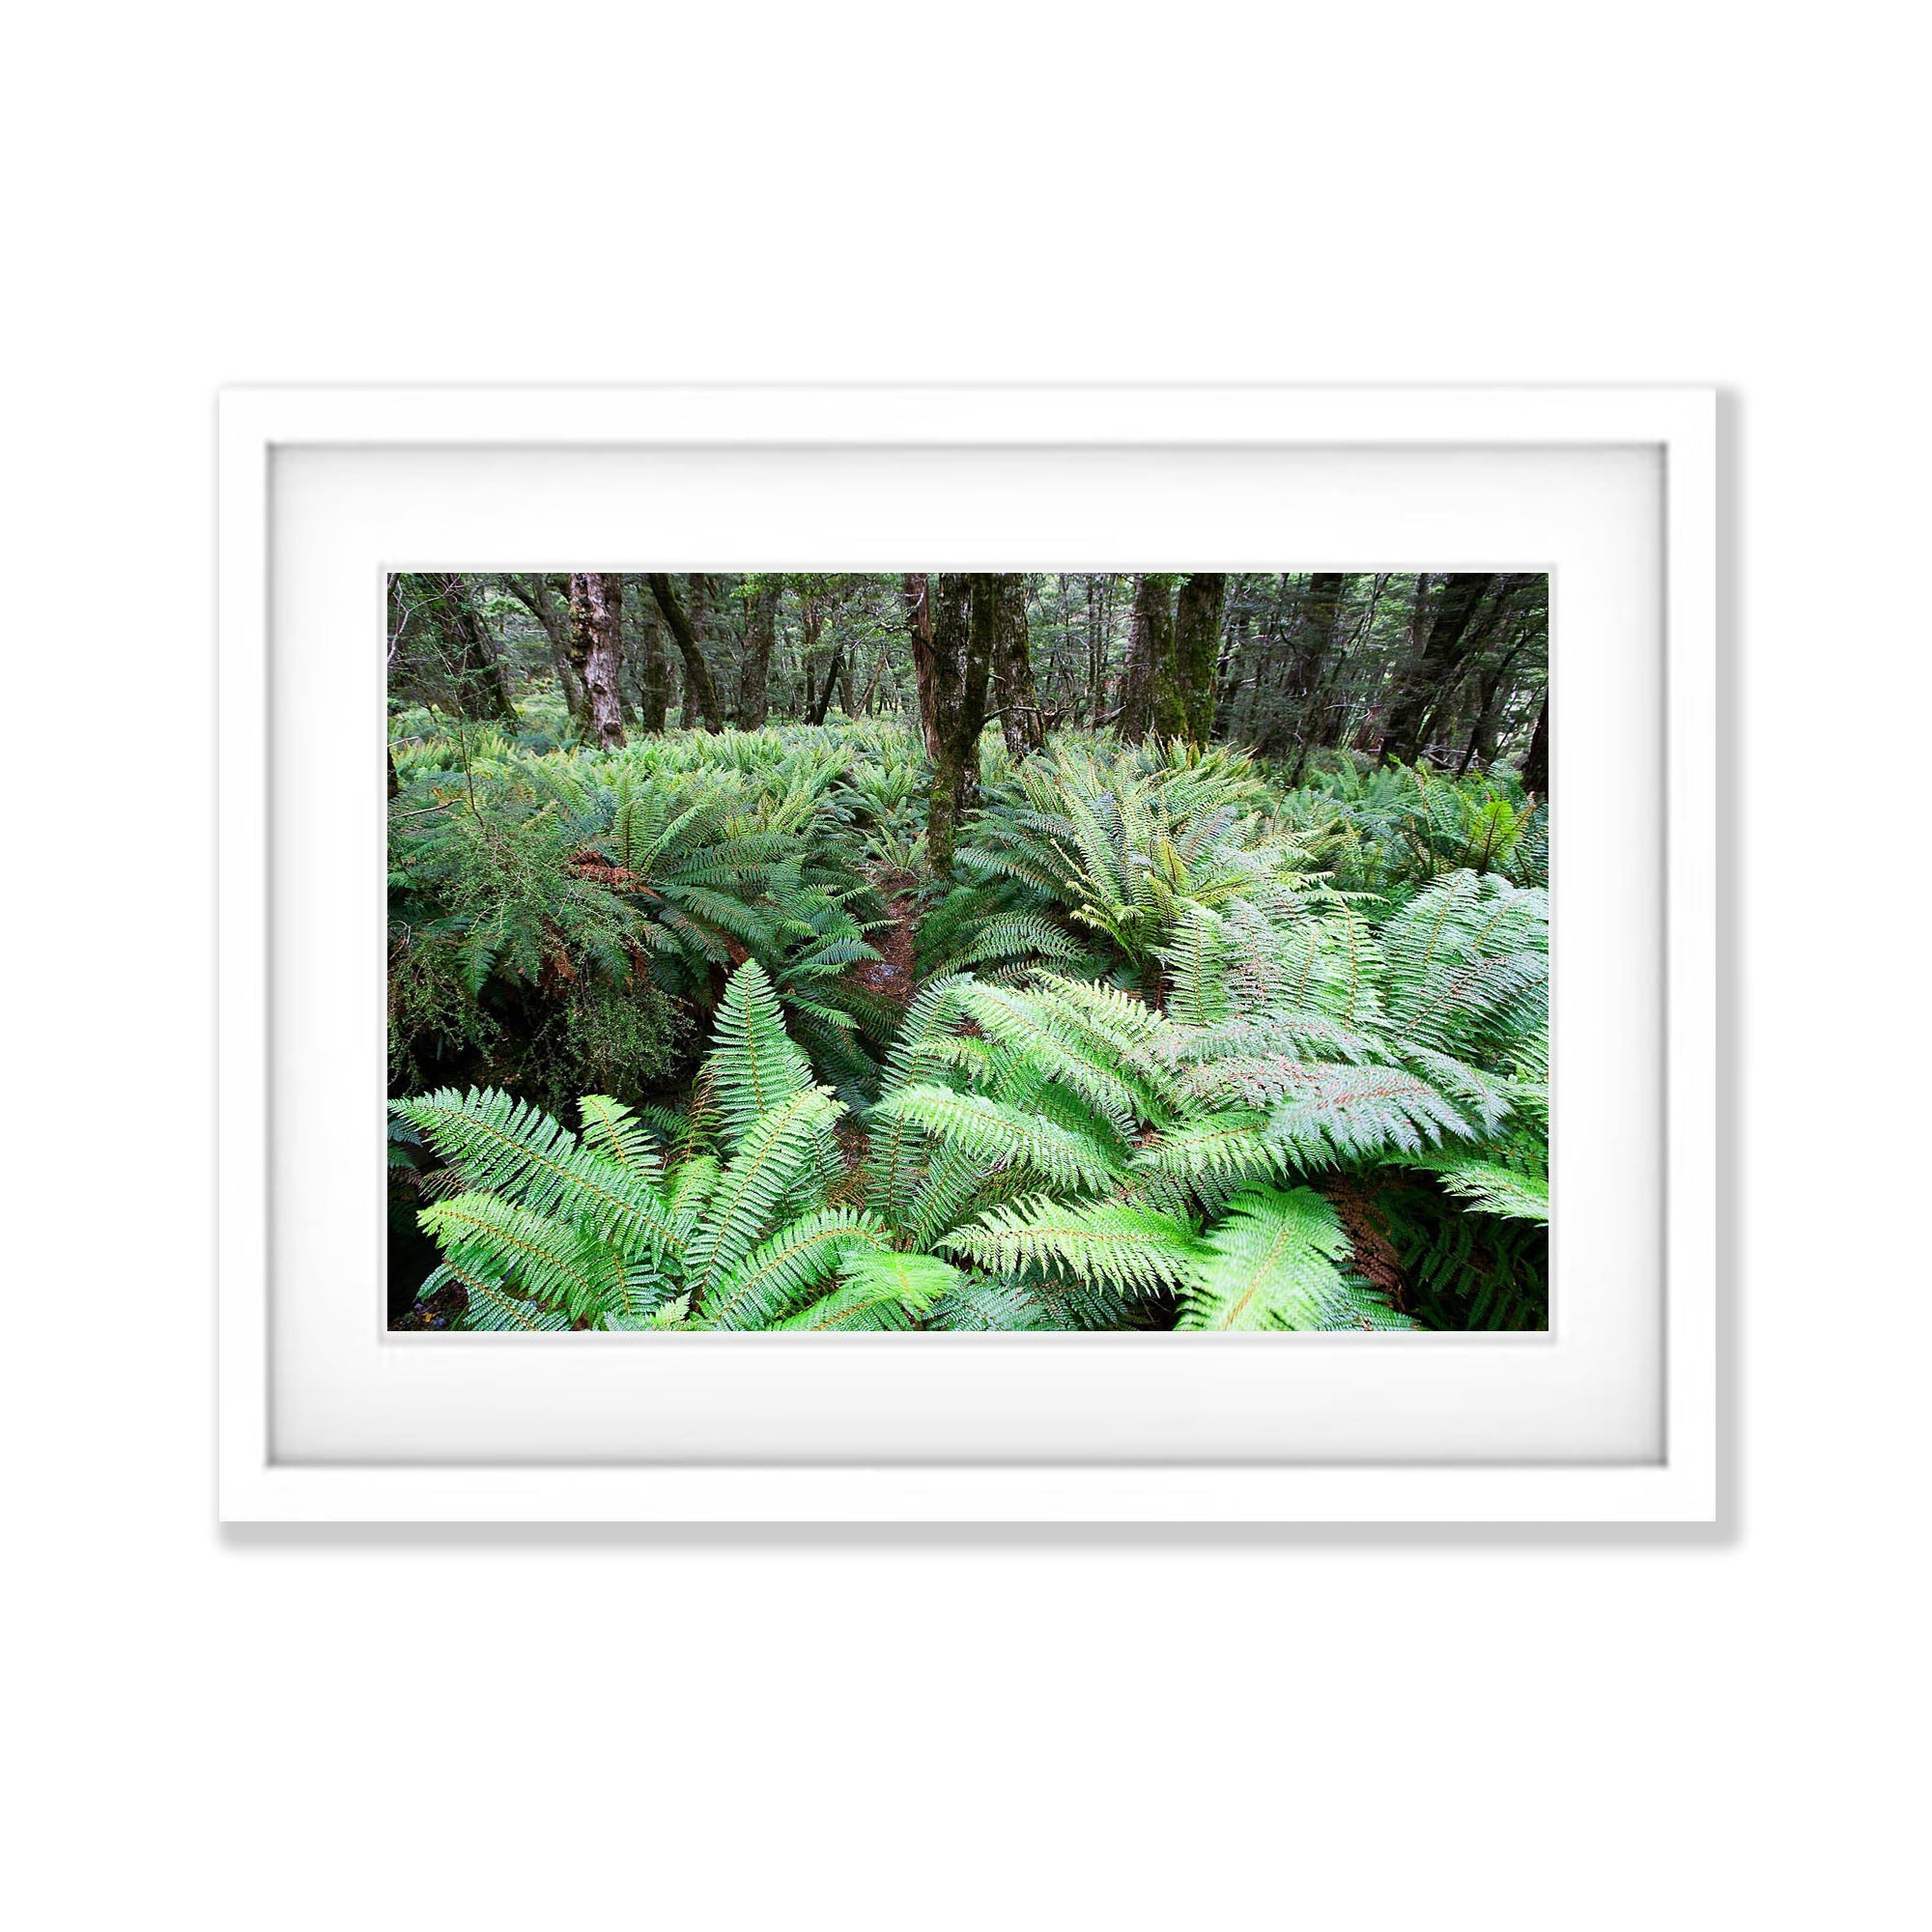 The Routeburn Fern Forests, Routeburn Track - New Zealand